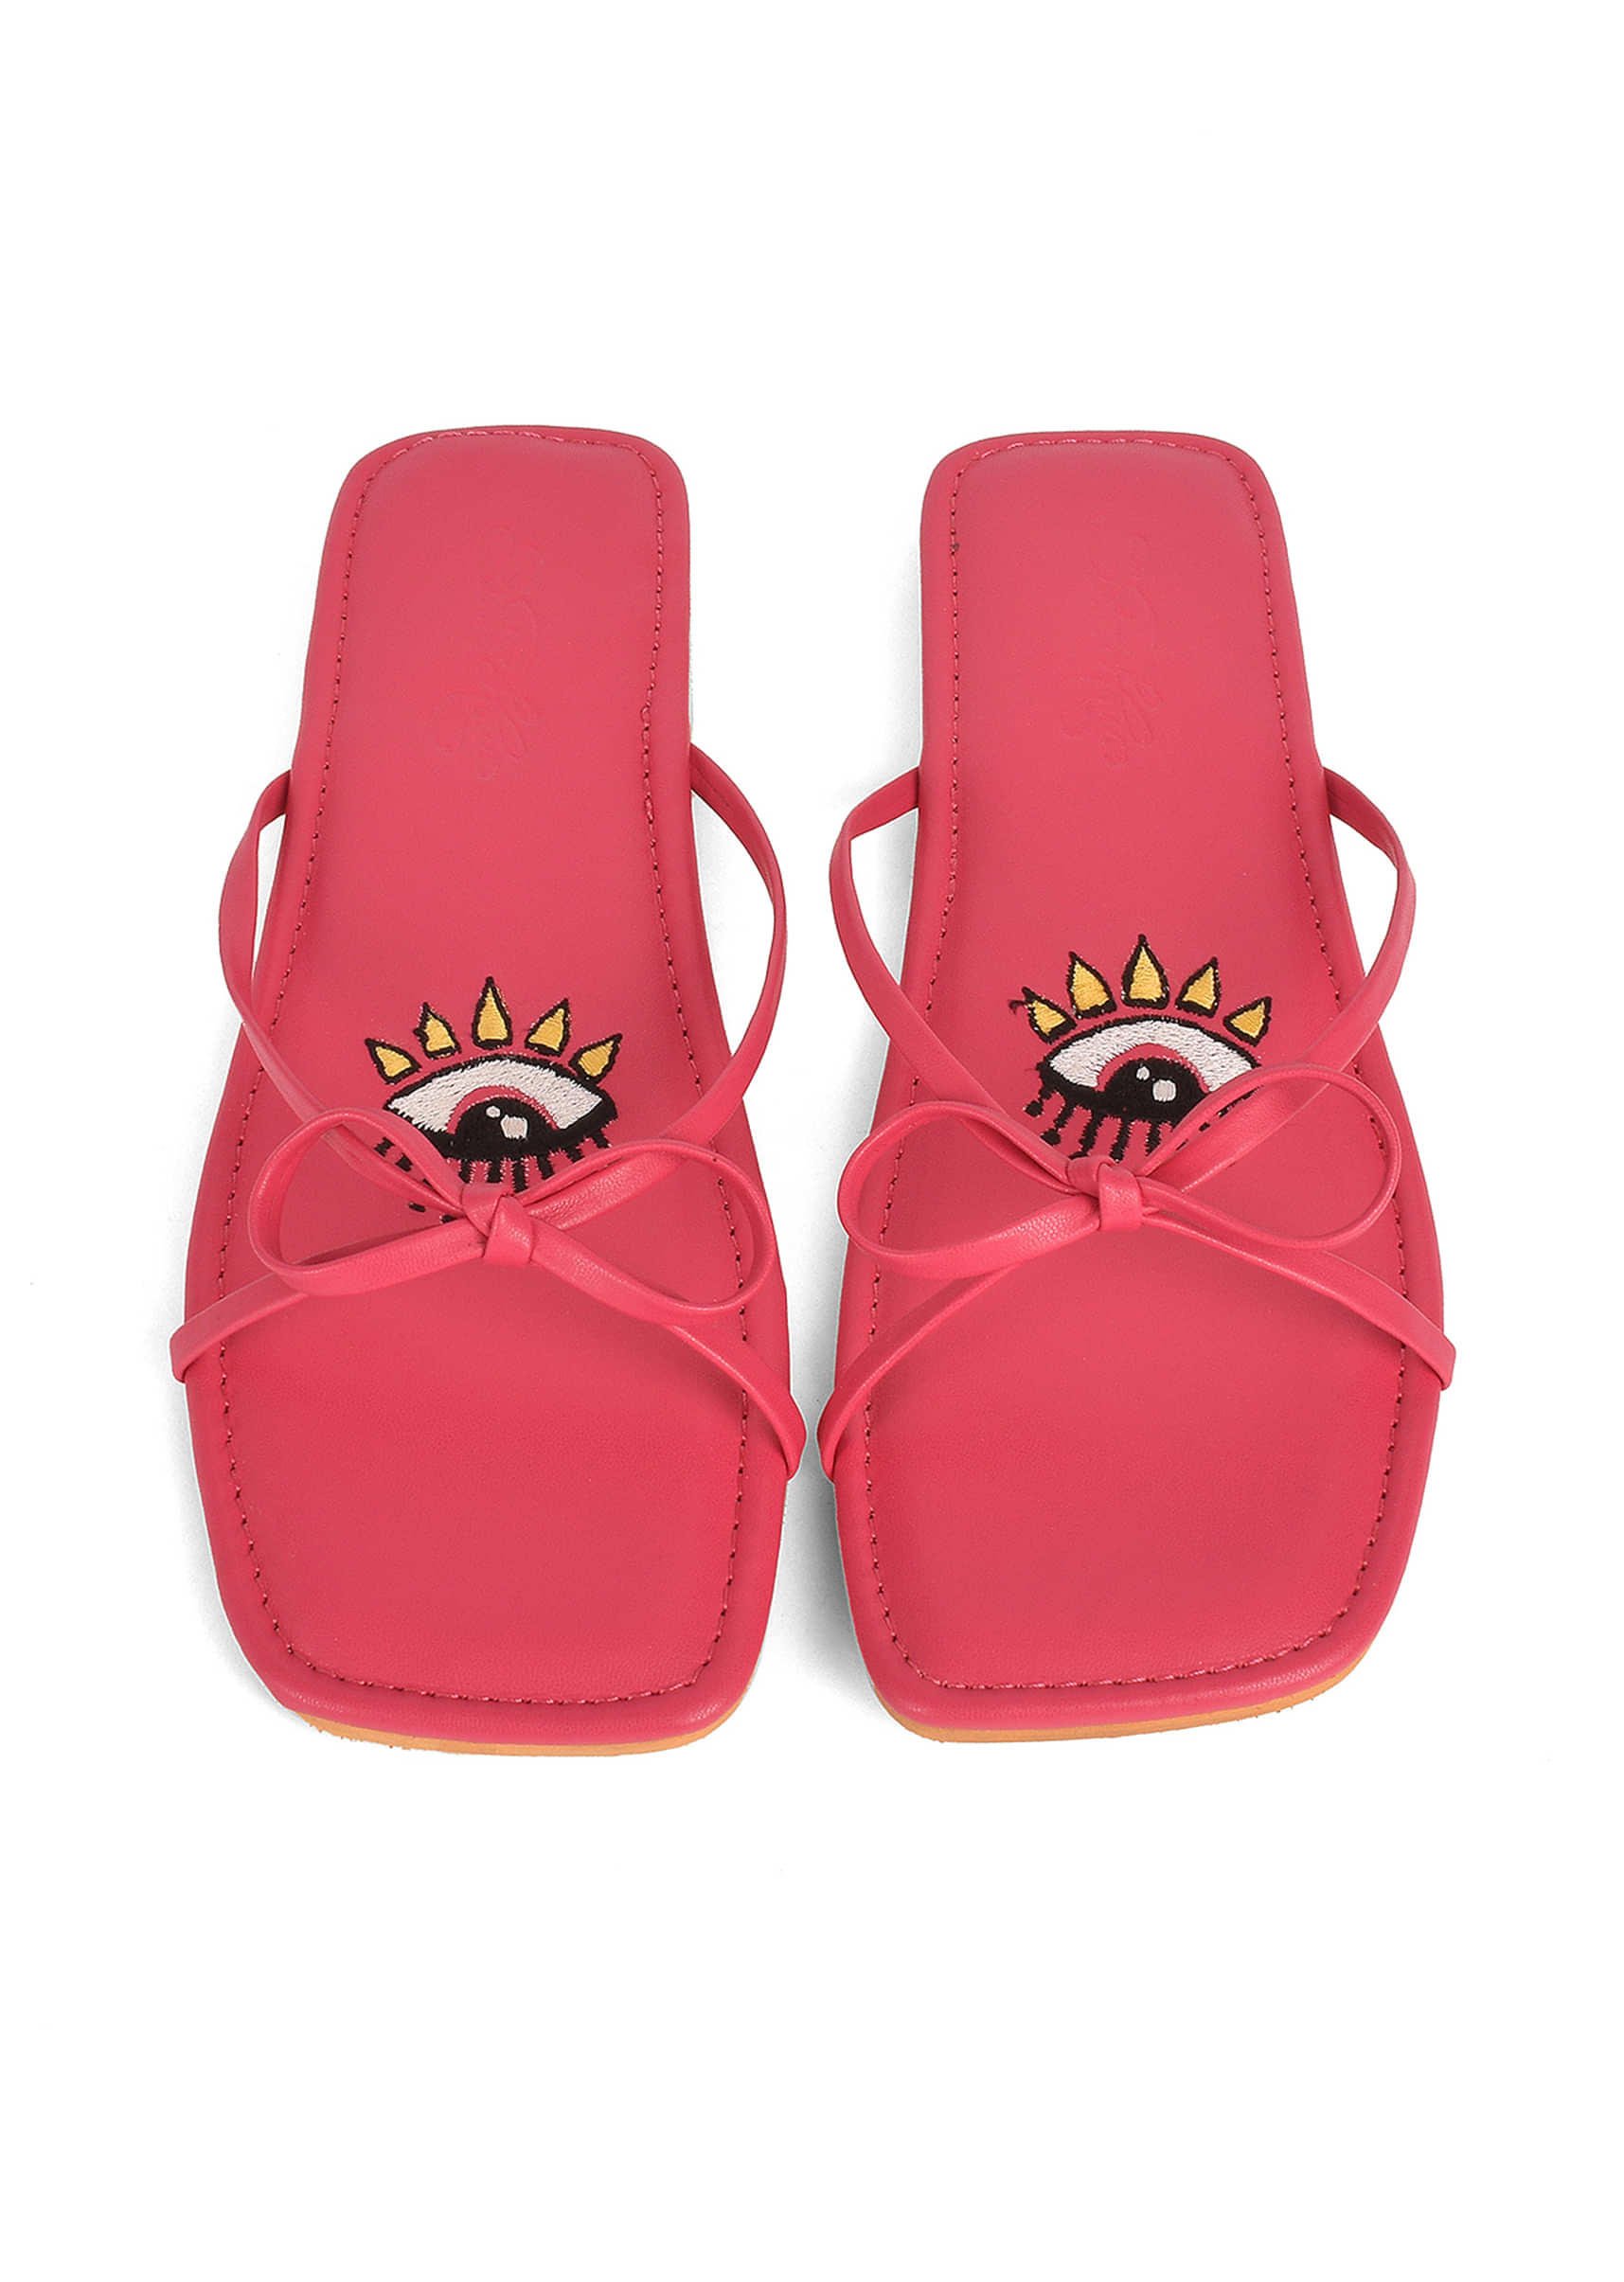 Pink Flats With Bow Detailing And Evil Eye Motif By Sole House